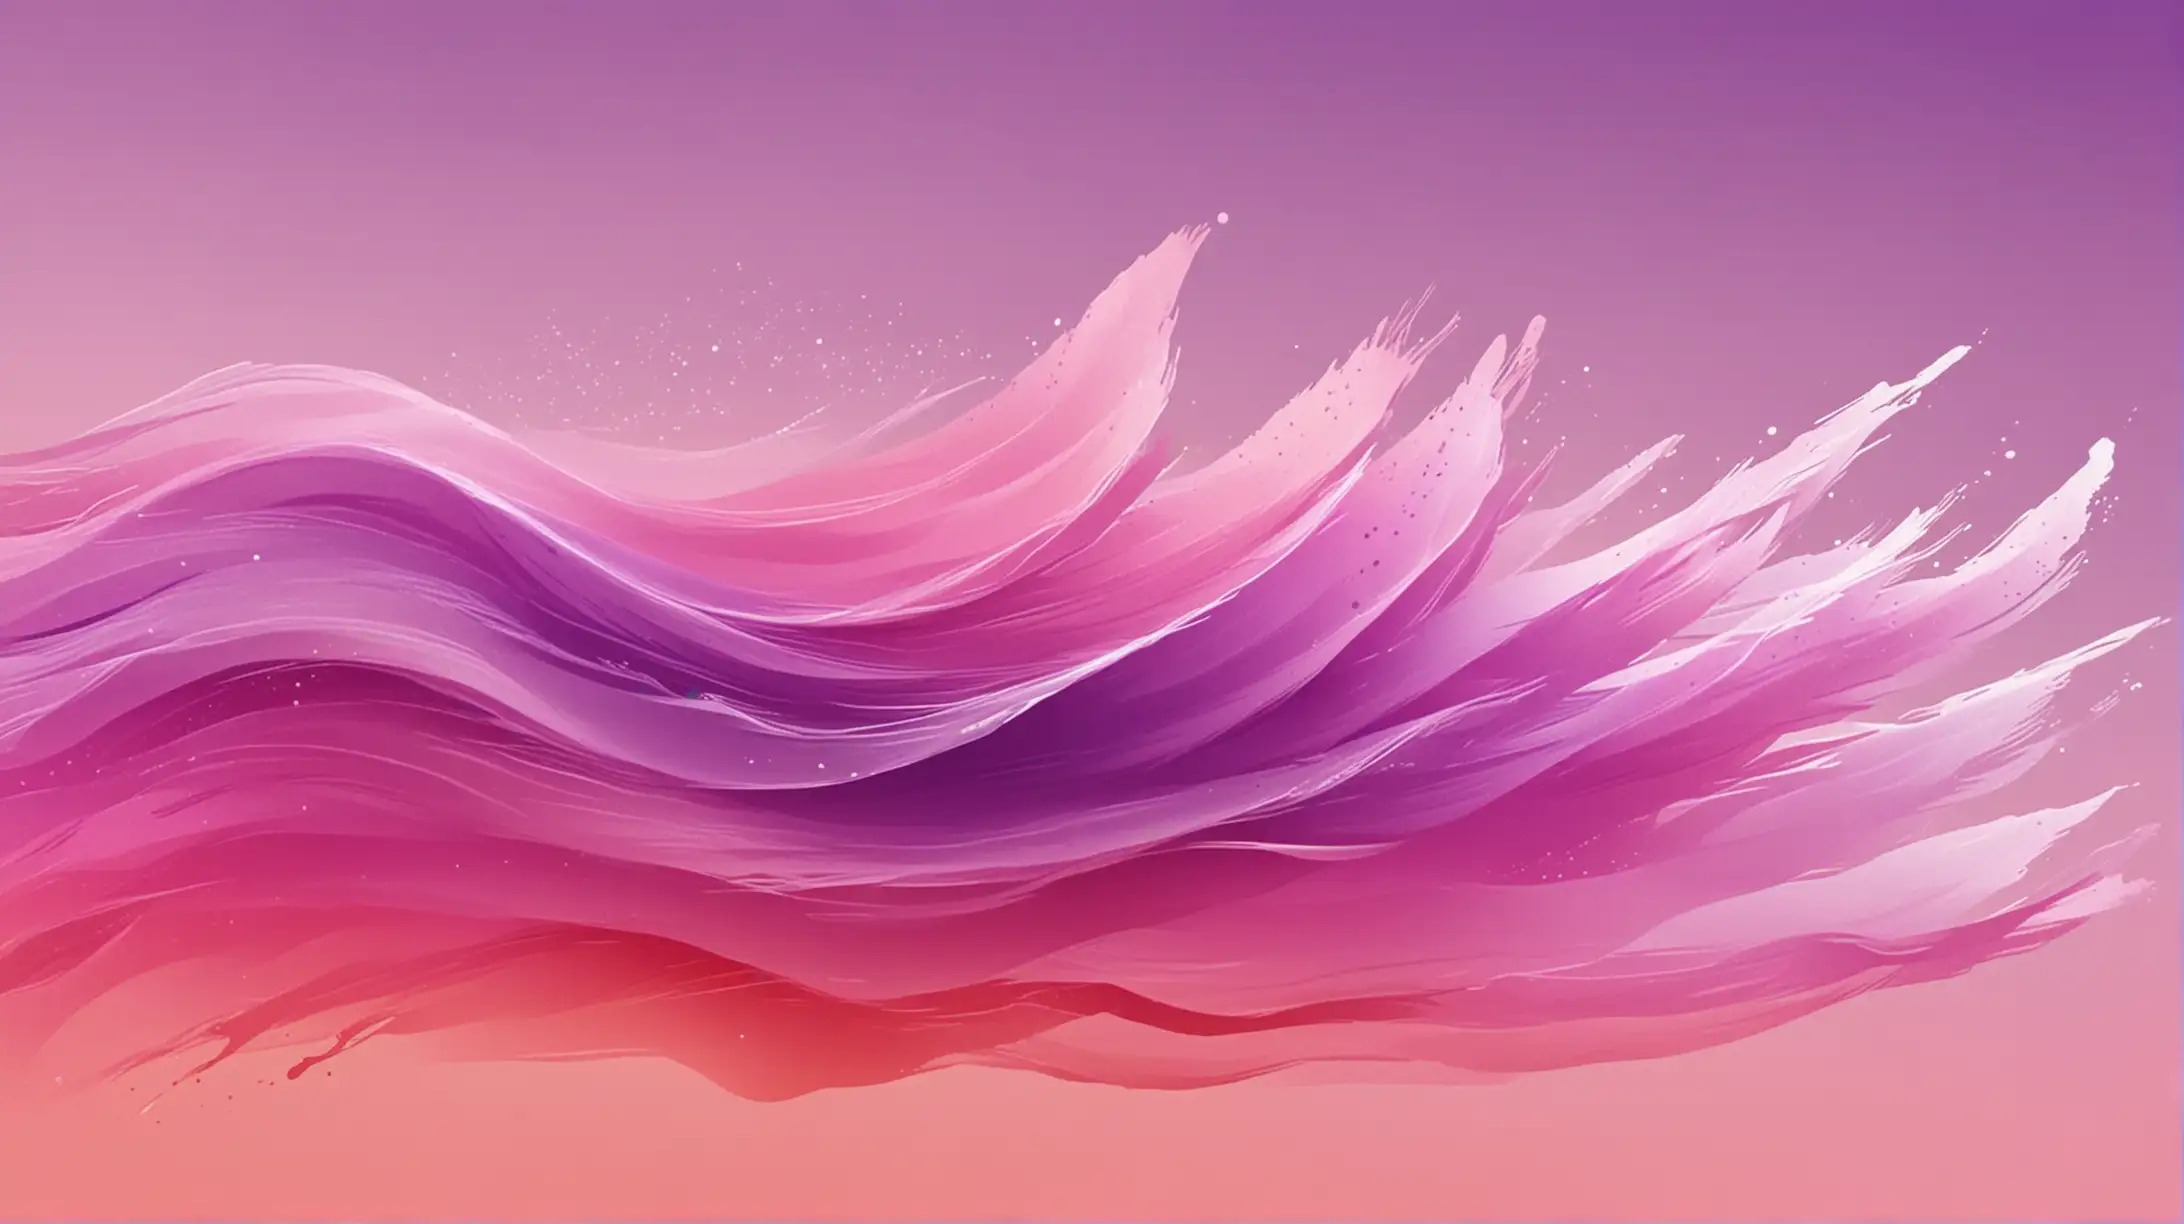 Vibrant Wind Movement in Gouache Art Purple and Red Gradient Smears